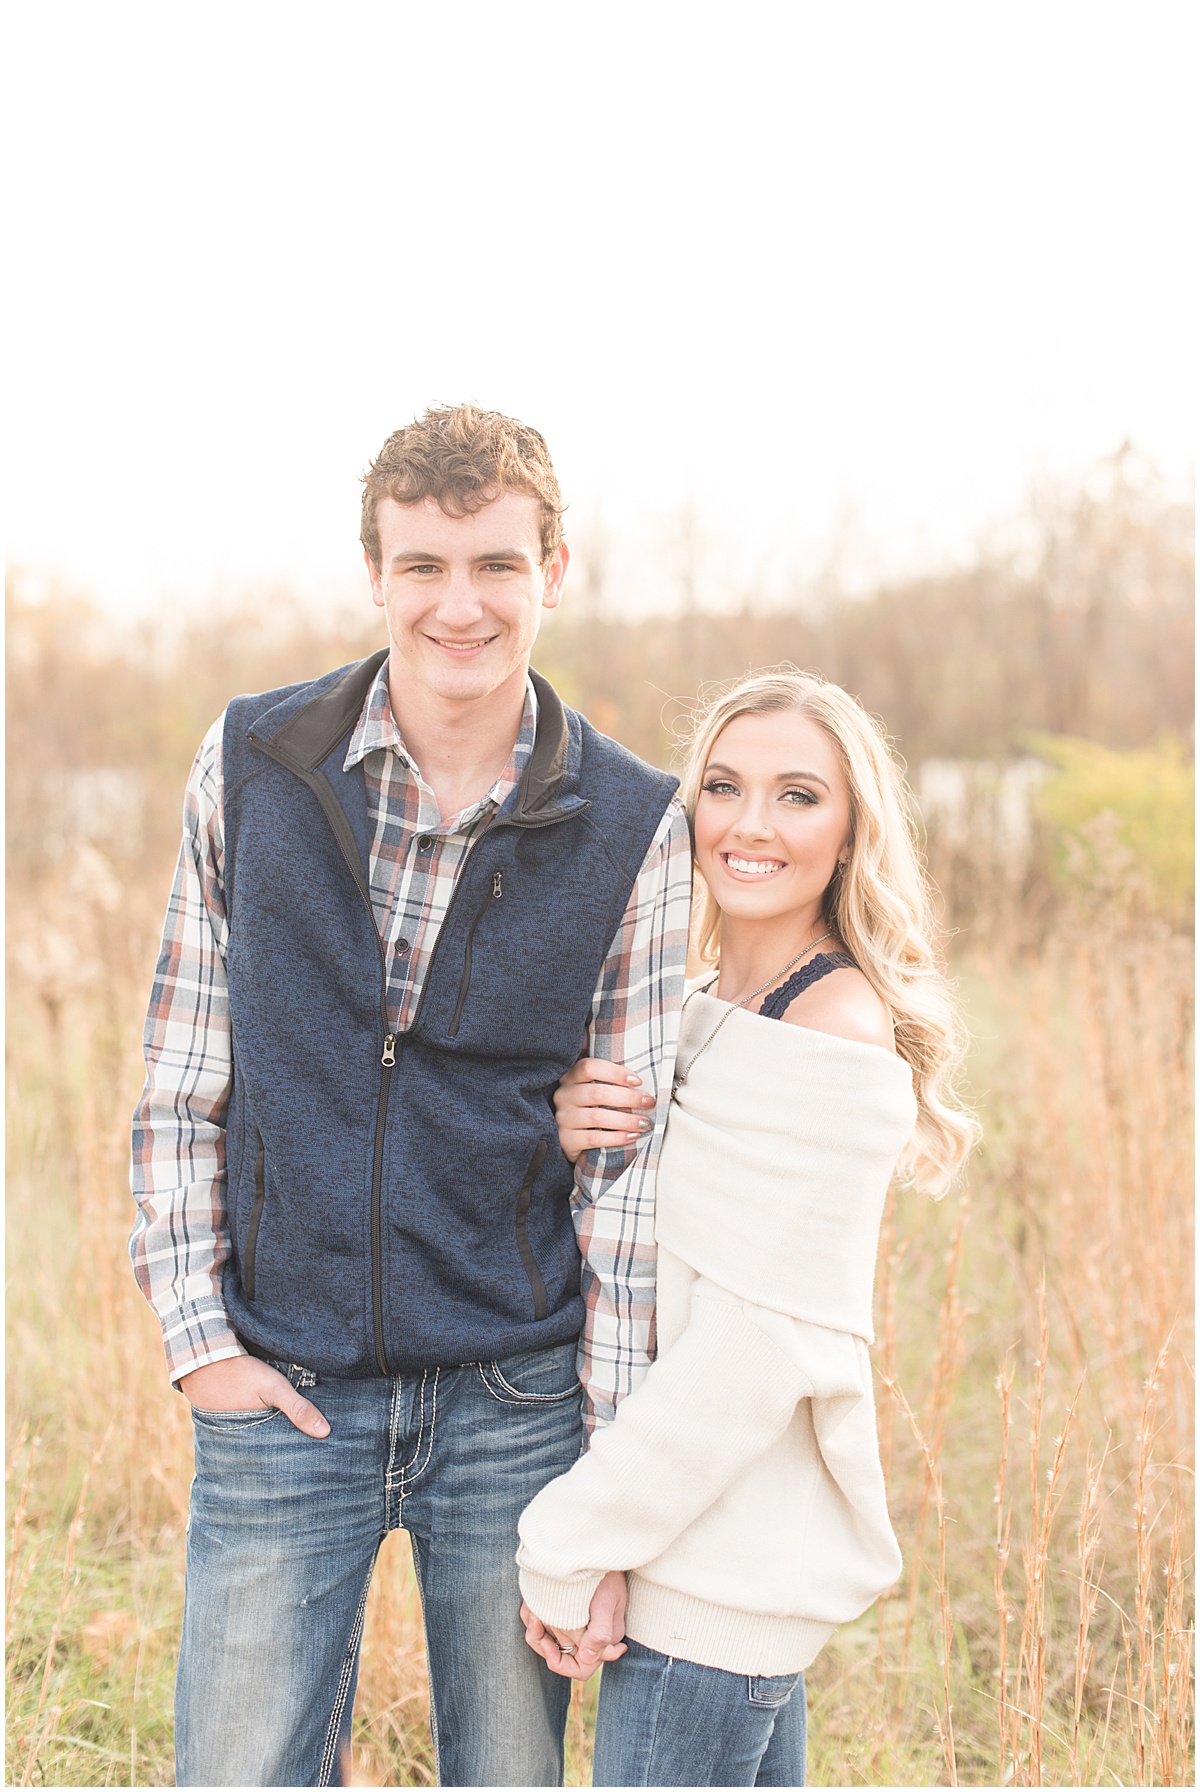 Wyatt Willson and Kaelyn Shircliff engagement session at Fairfield Lakes Park in Lafayette Indiana 13.jpg